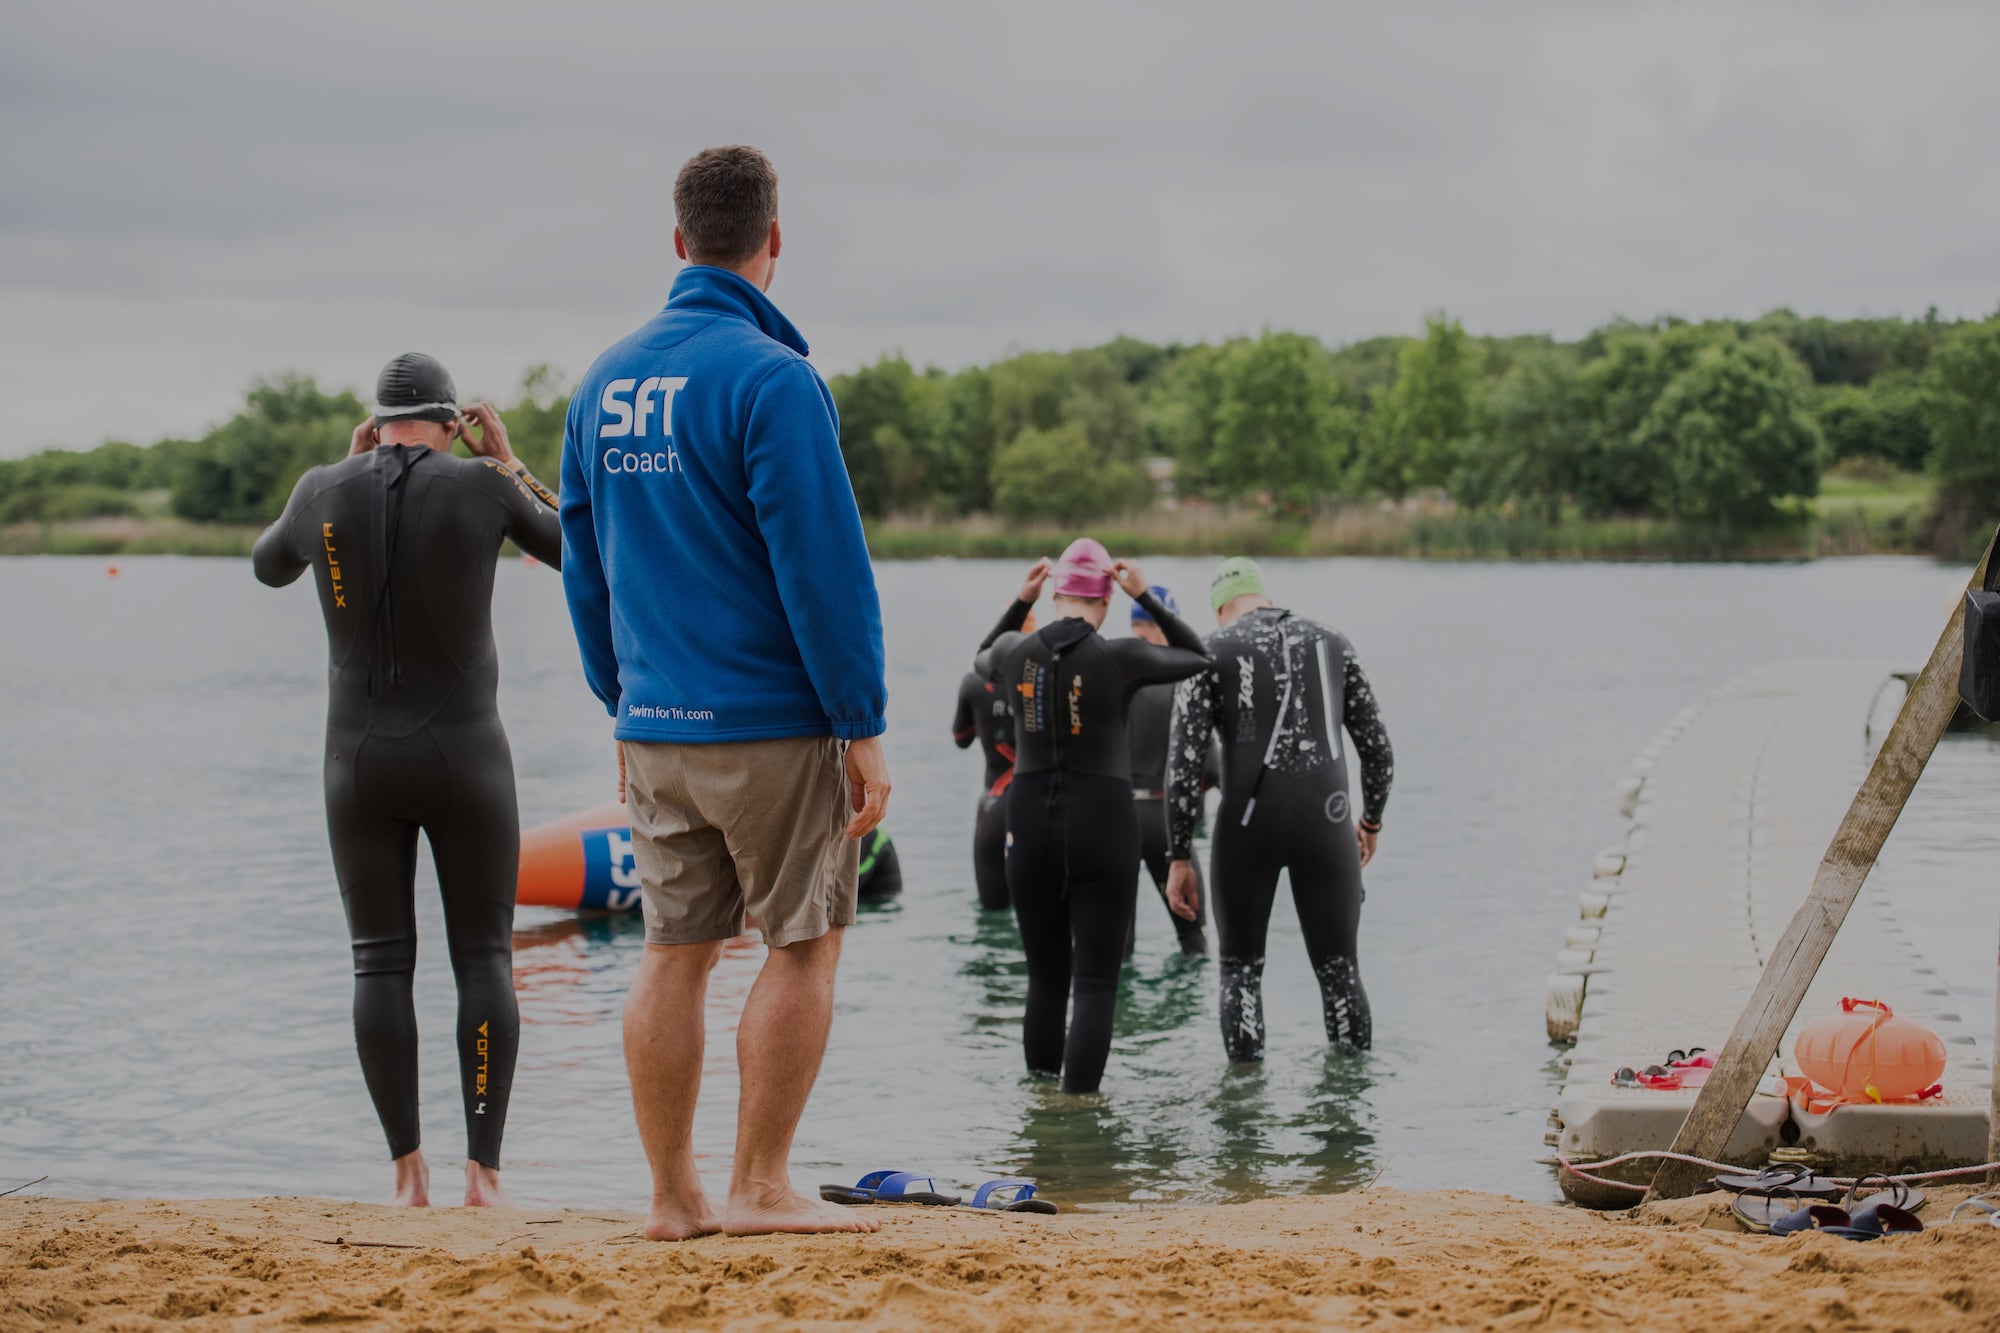 Swim for Tri - Swimmers entering the water at Stubbers Lake Essex